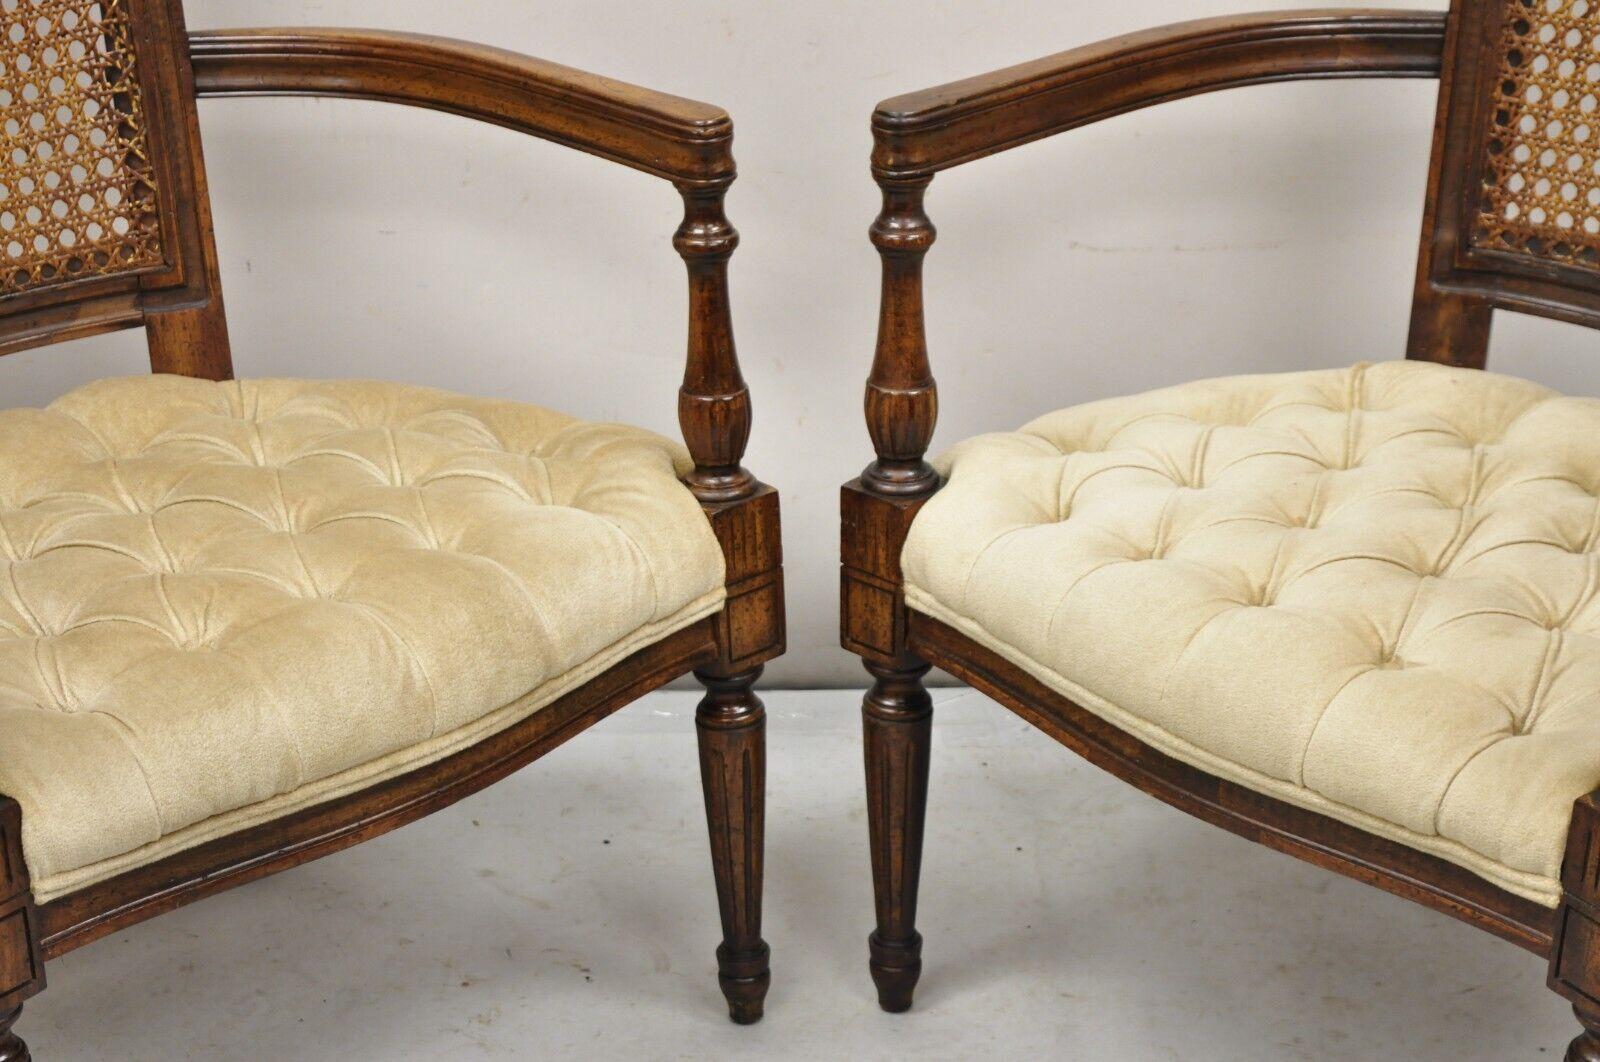 Vintage Hollywood Regency Tall Cane Back Fireside Lounge Armchairs - a Pair In Good Condition For Sale In Philadelphia, PA